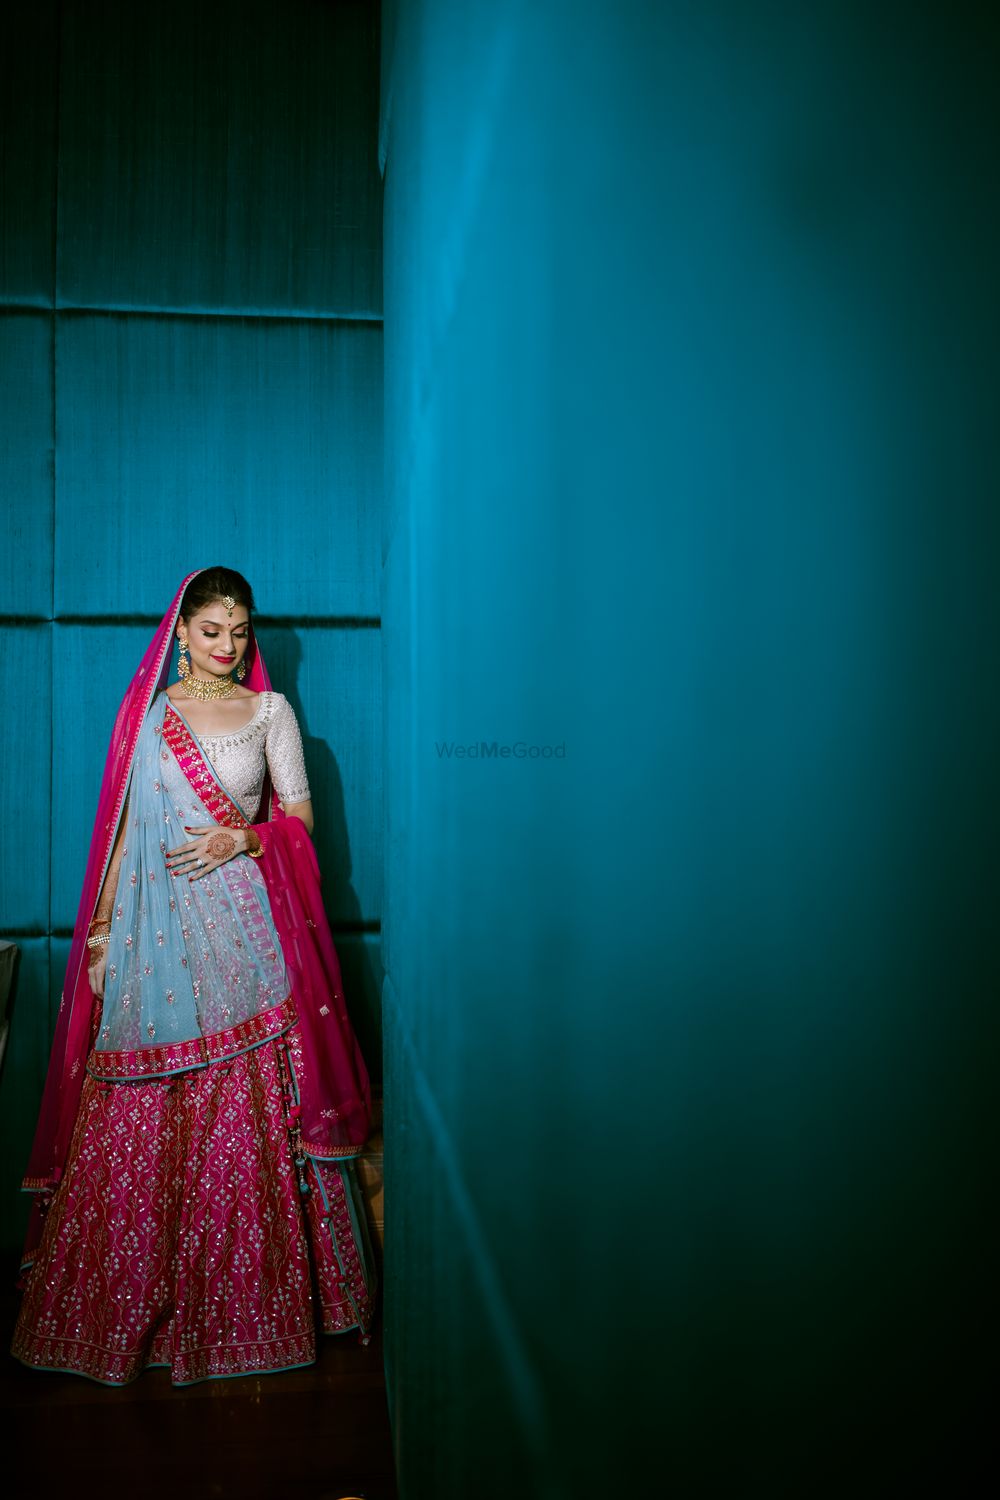 Photo of A bride in a pink lehenga with a contrasting blue dupatta on her wedding day